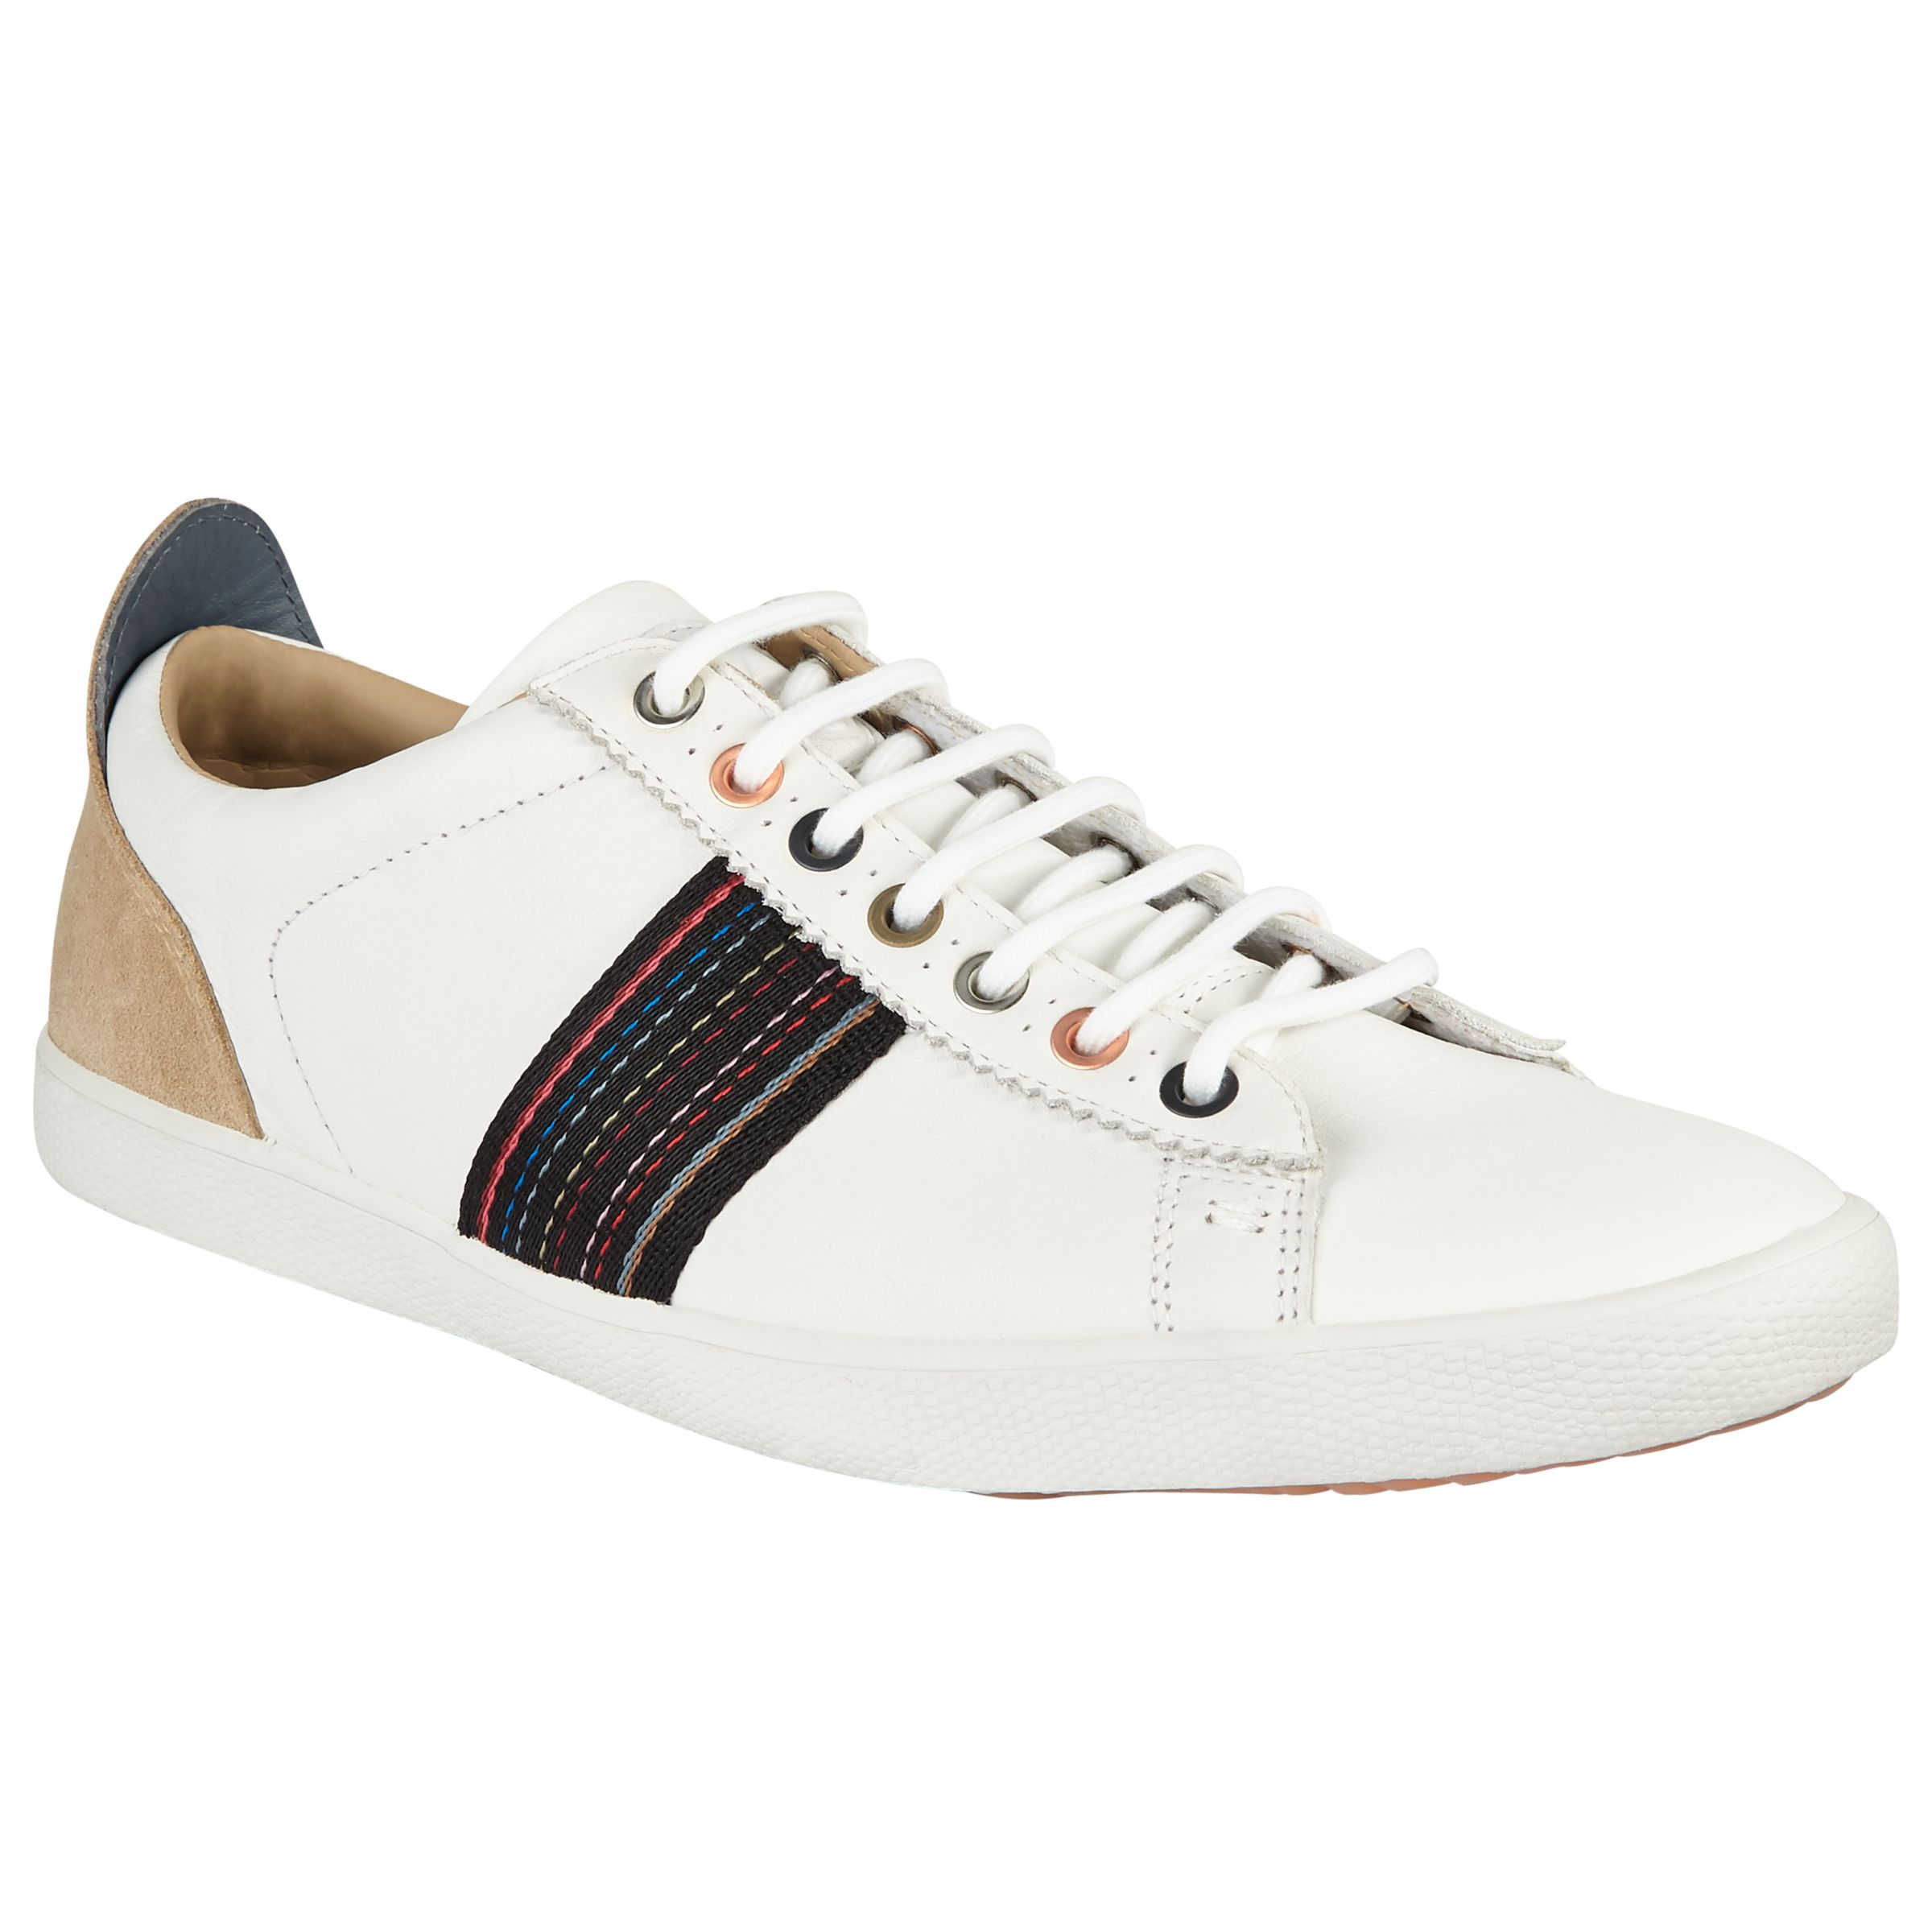 Paul Smith Mlux Osmo Trainers at John Lewis & Partners